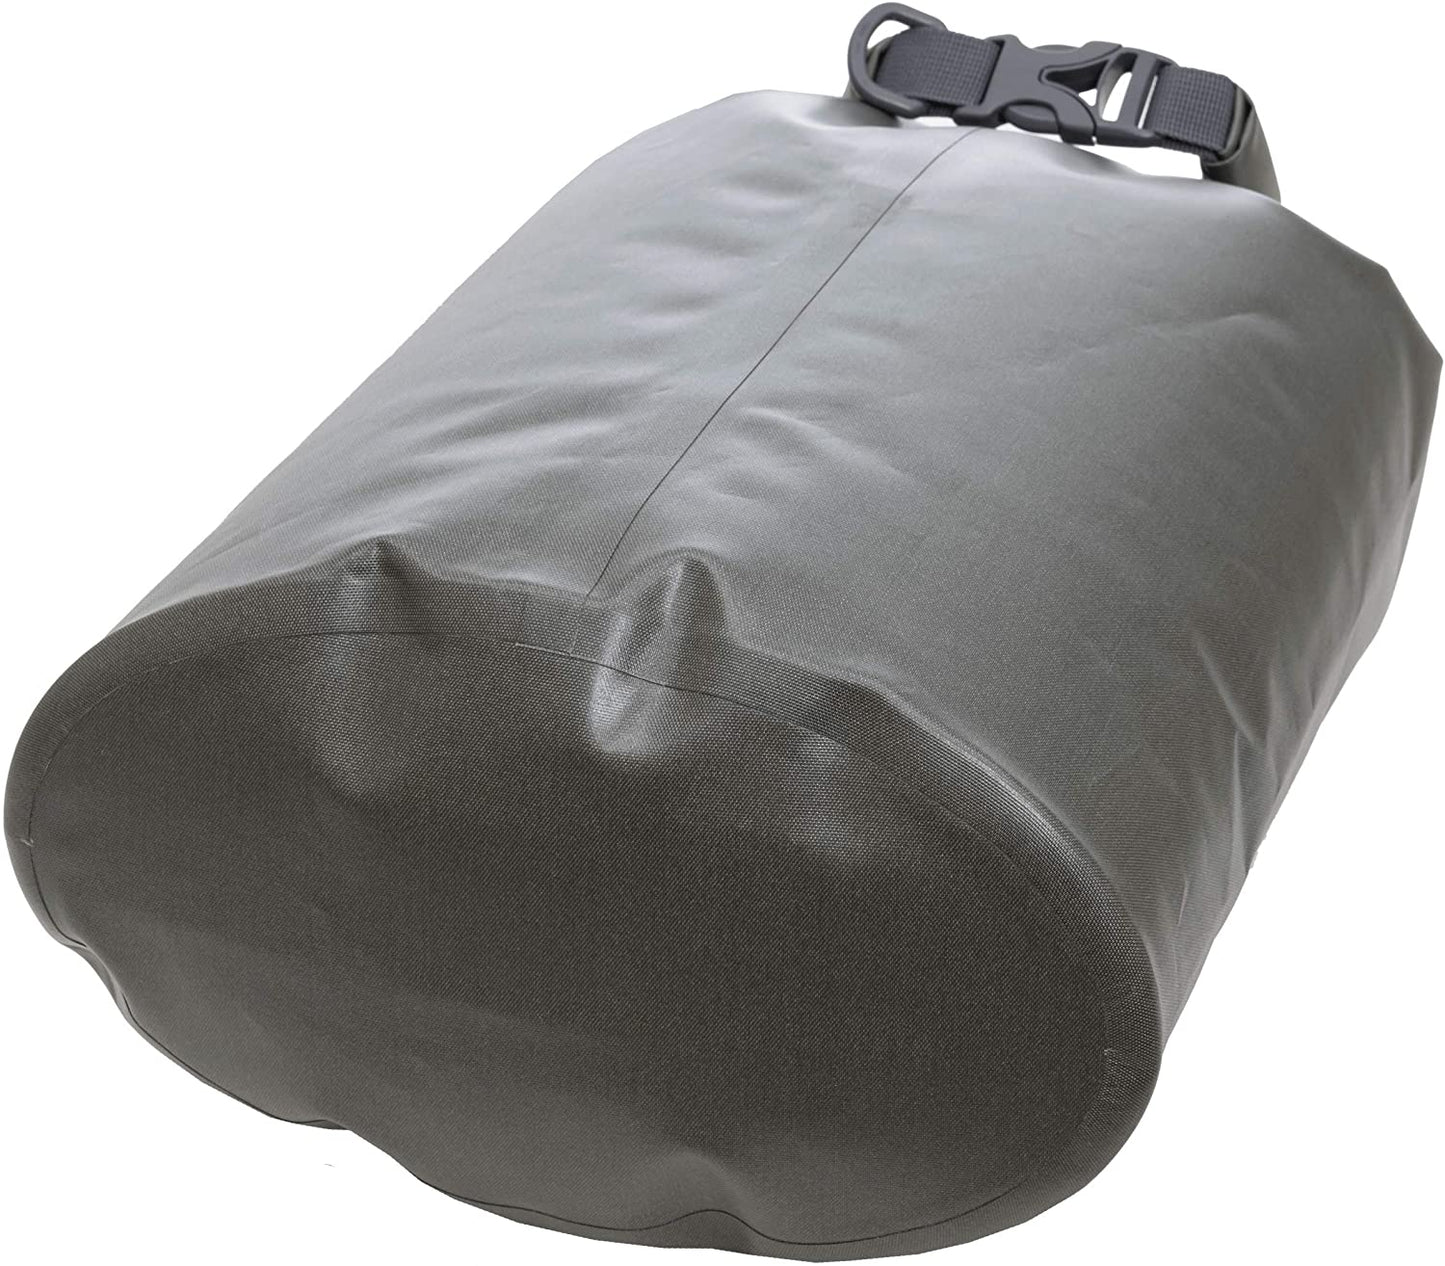 ALPS Mountaineering Dry Passage Waterproof Dry Bag 35L, Charcoal - AL7464018